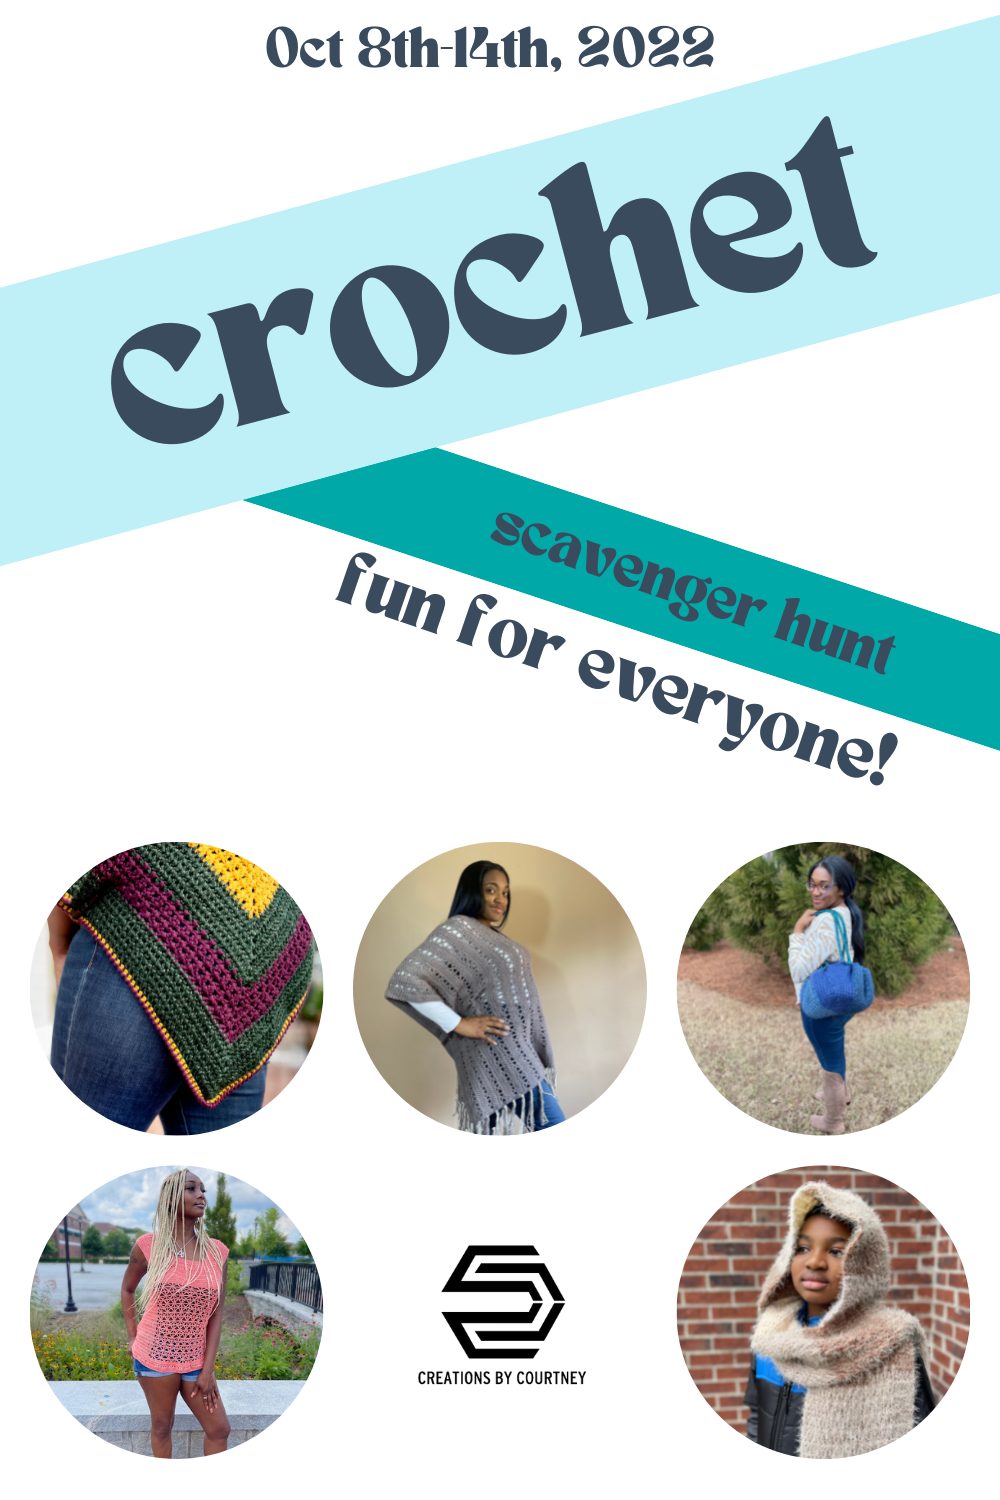 Play a crochet scavenger hunt with Creations by Courtney to receive coupons to purchase crochet patterns or a canvas tote bag, and correct responses will be entered into a drawing for one grand prize and 10 winners for a pattern of choice.